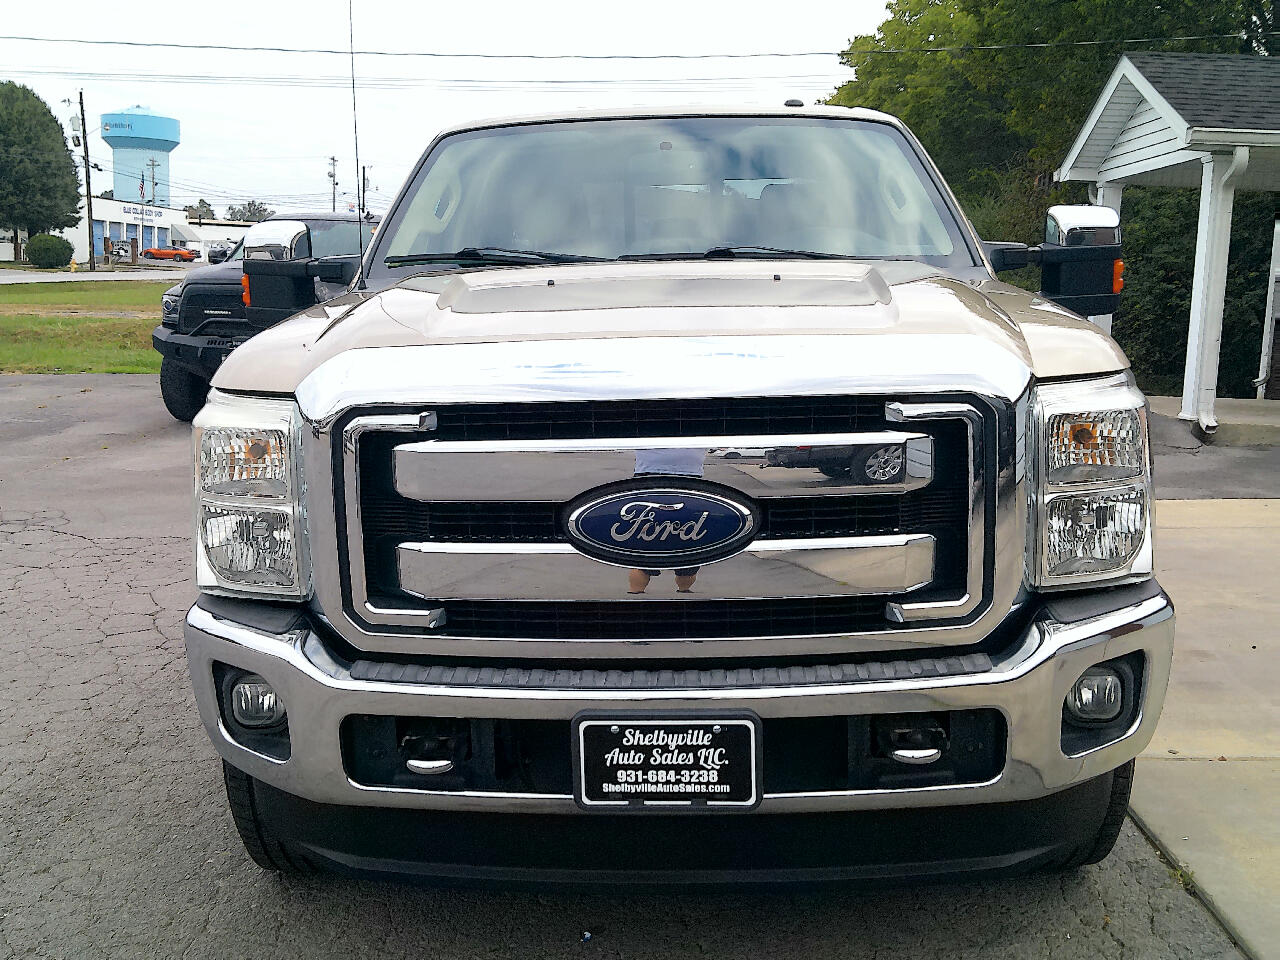 2013 Ford Super Duty F-250 VERY NICE4WDSTEP BARSHEATED AND COOLED SEATS